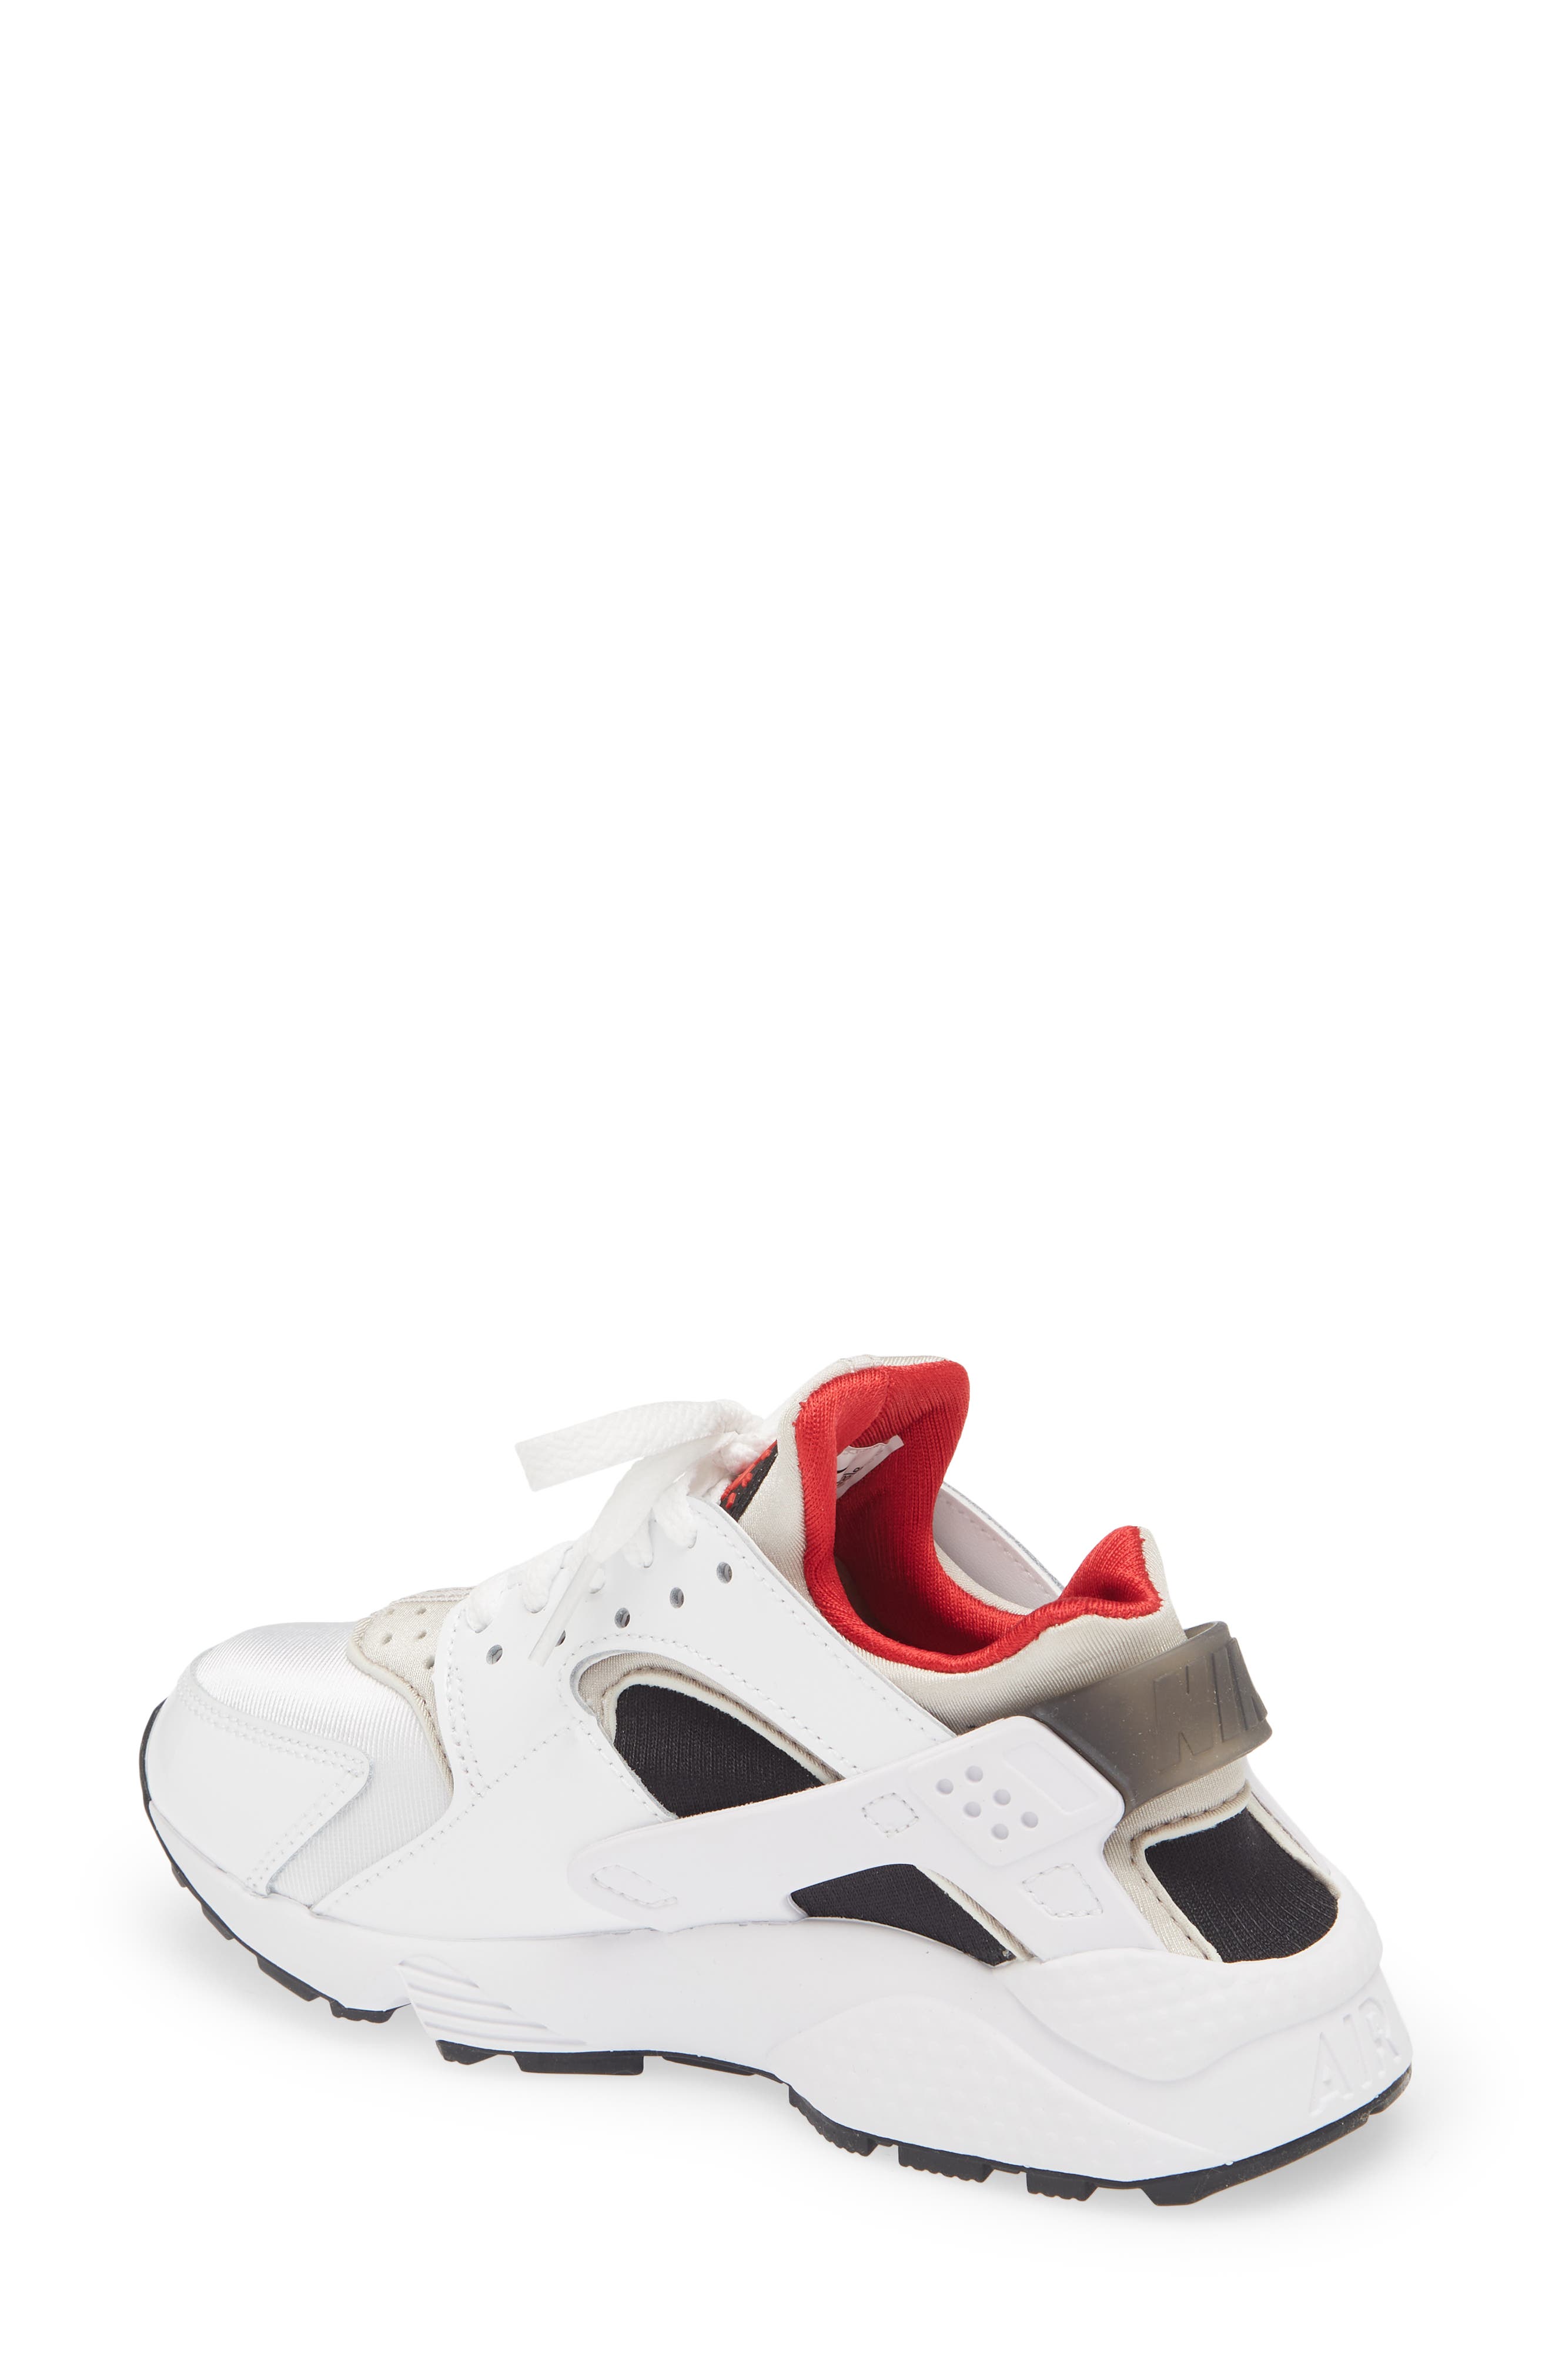 nordstrom huaraches